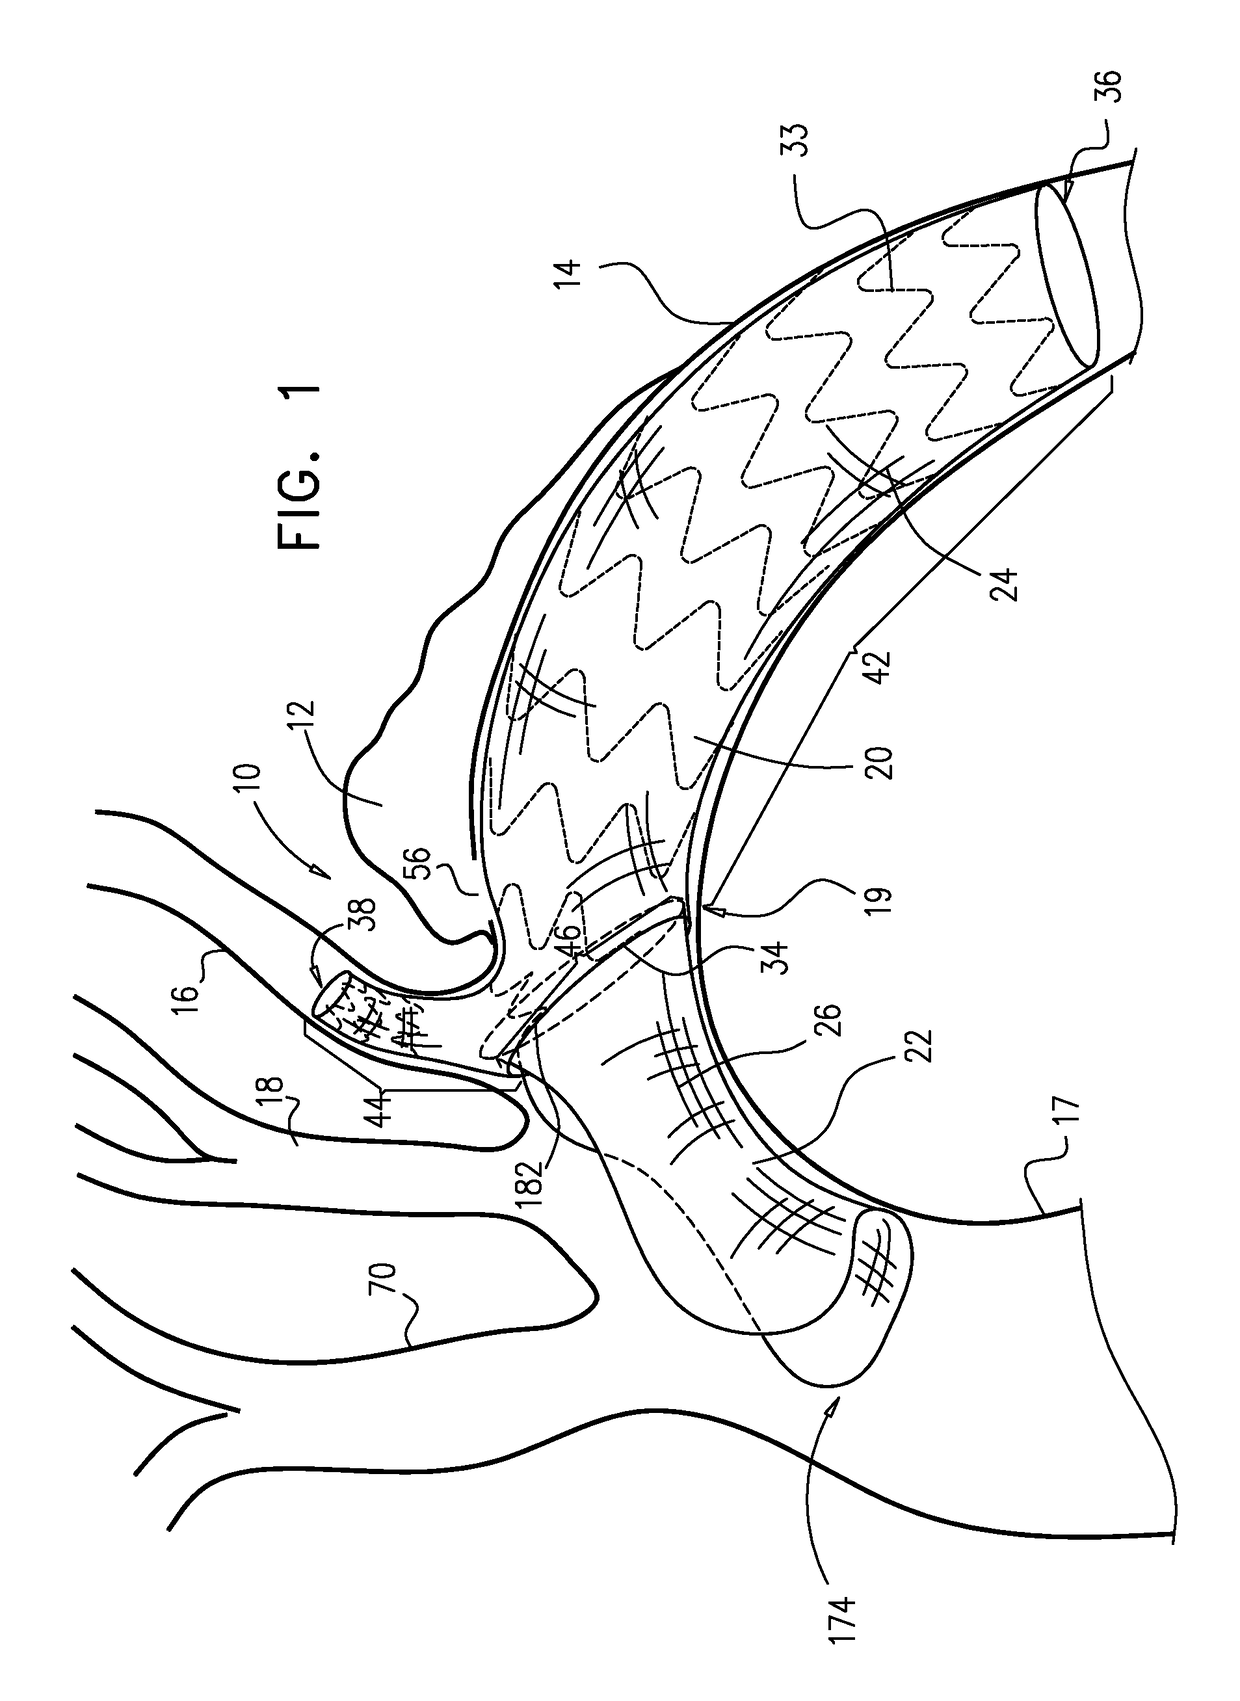 Multi-component stent-graft system for aortic dissections